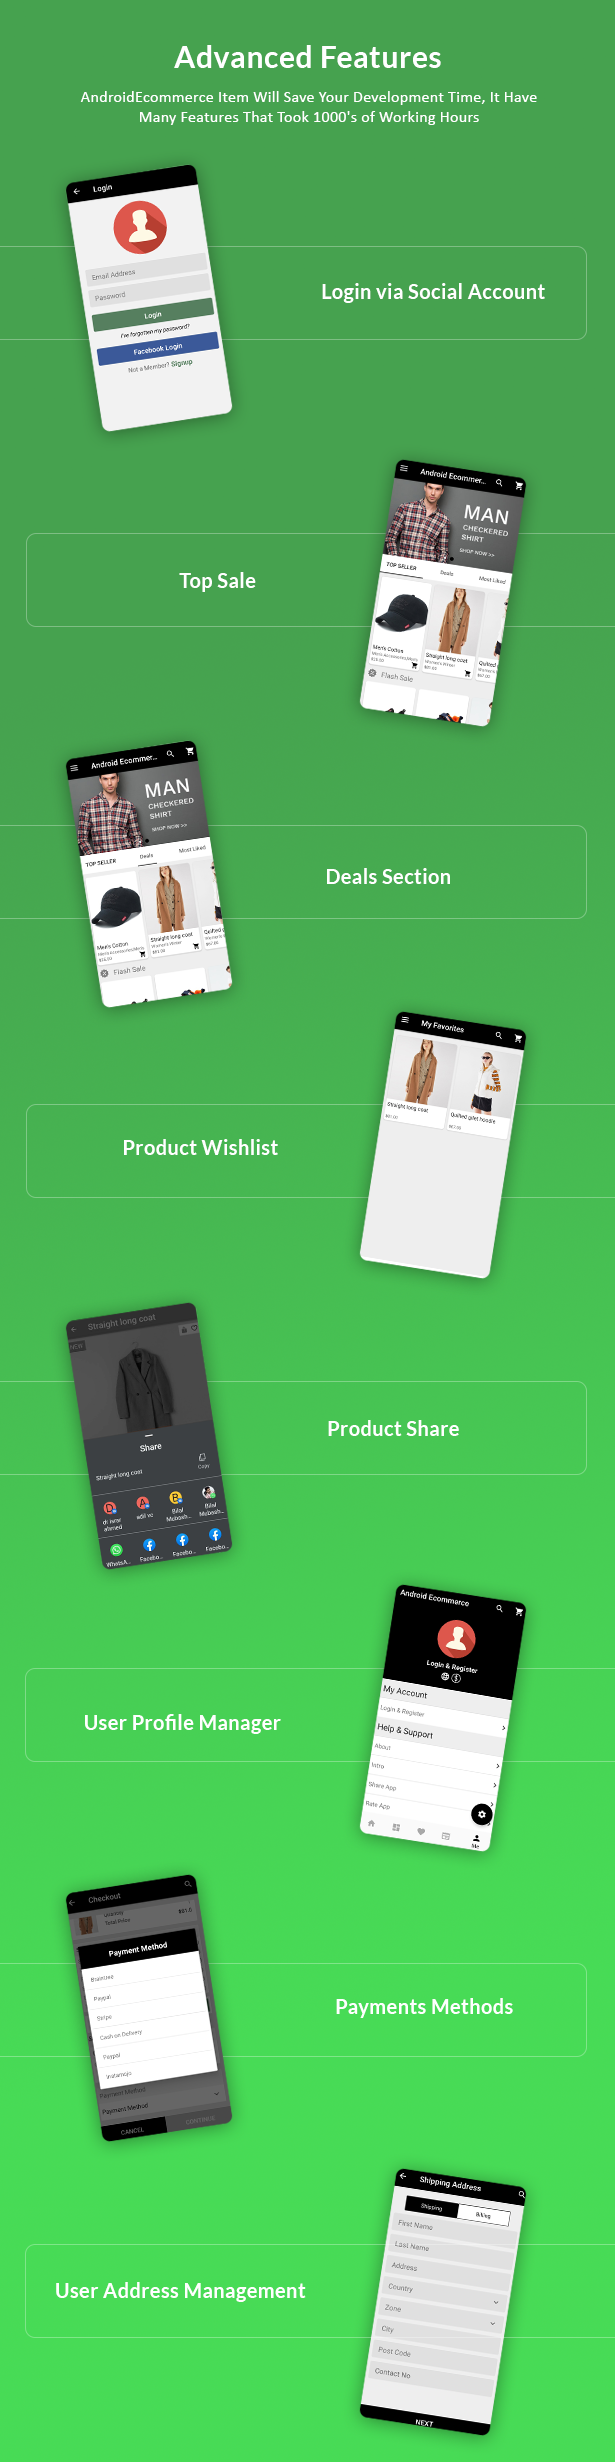 Android Ecommerce - Universal Android Ecommerce / Store Full Mobile App with Laravel CMS - 20